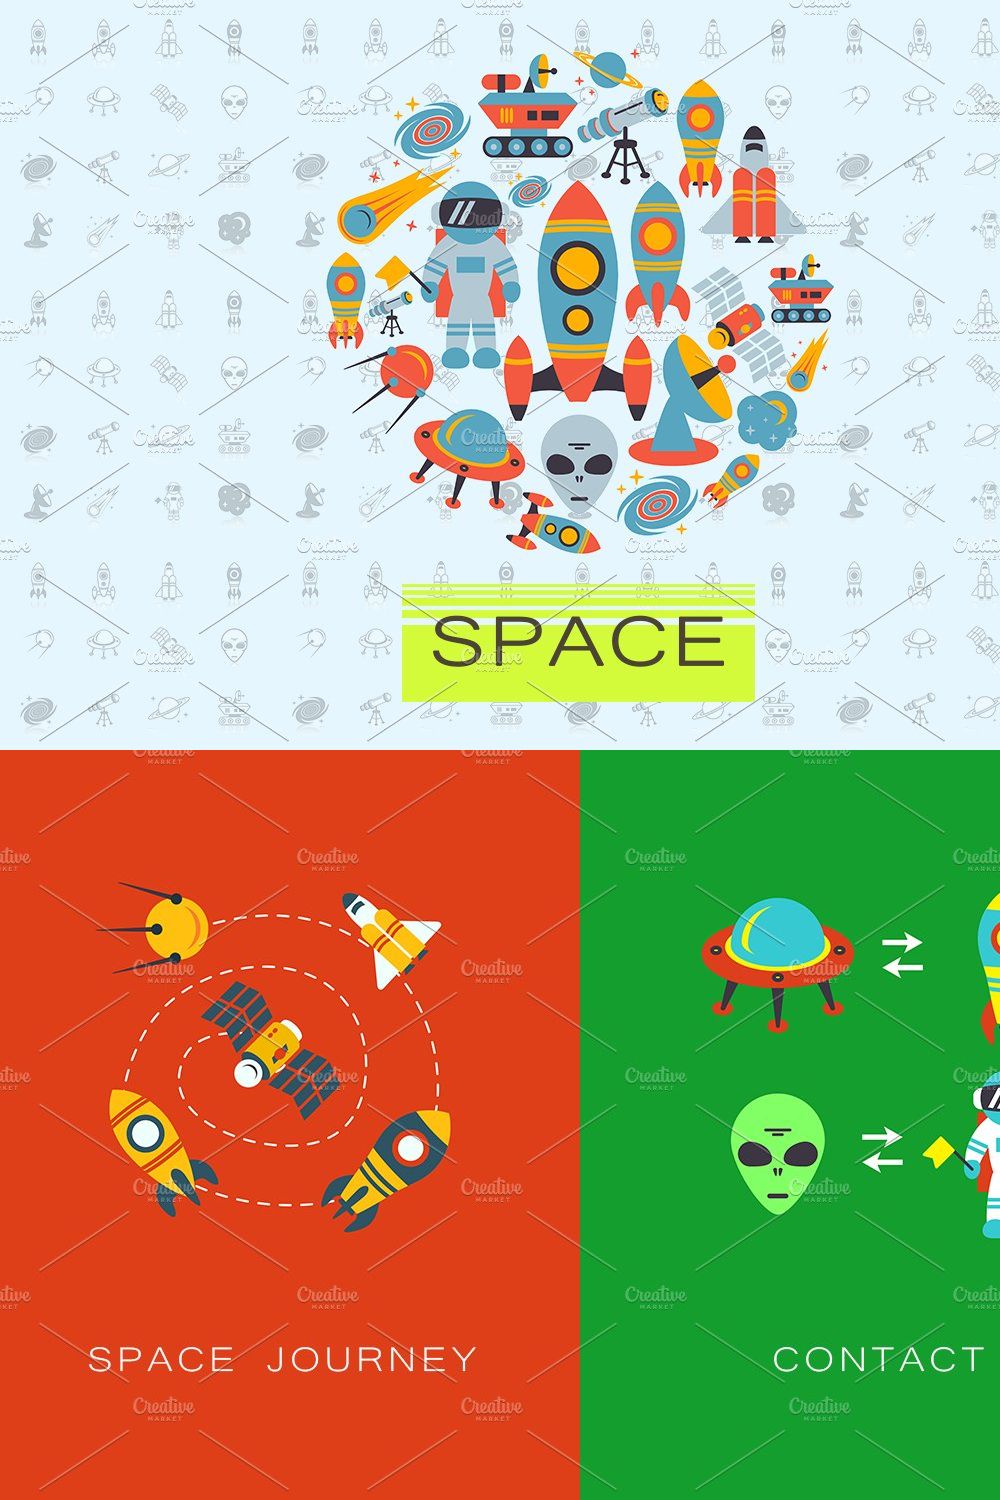 Space icons and flat vector patterns pinterest preview image.